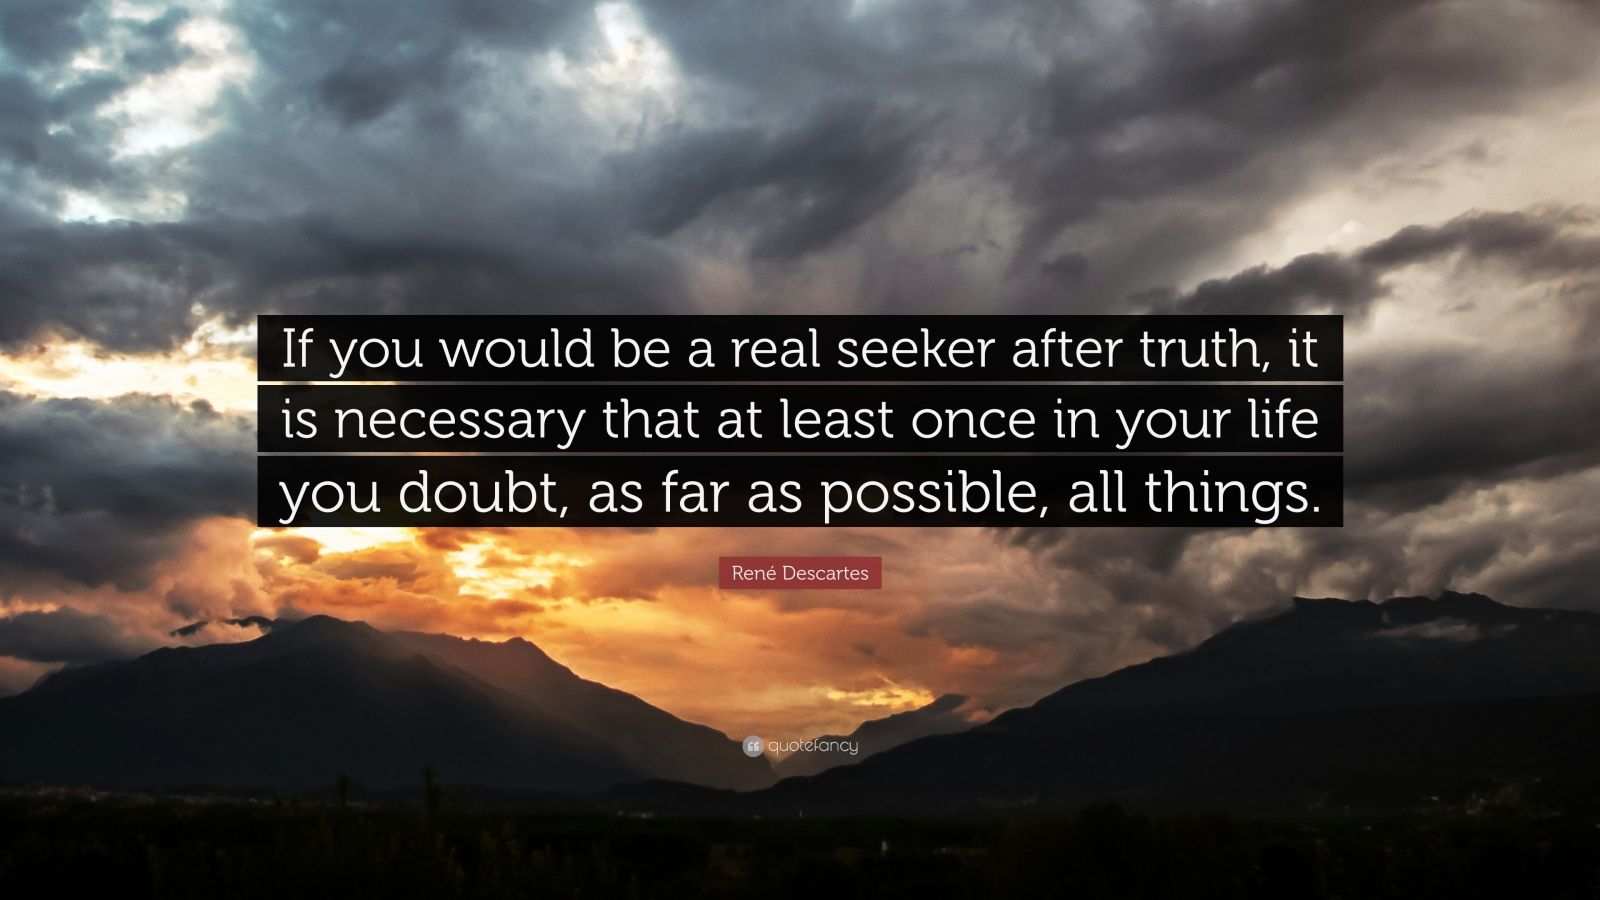 René Descartes Quote: "If you would be a real seeker after ...